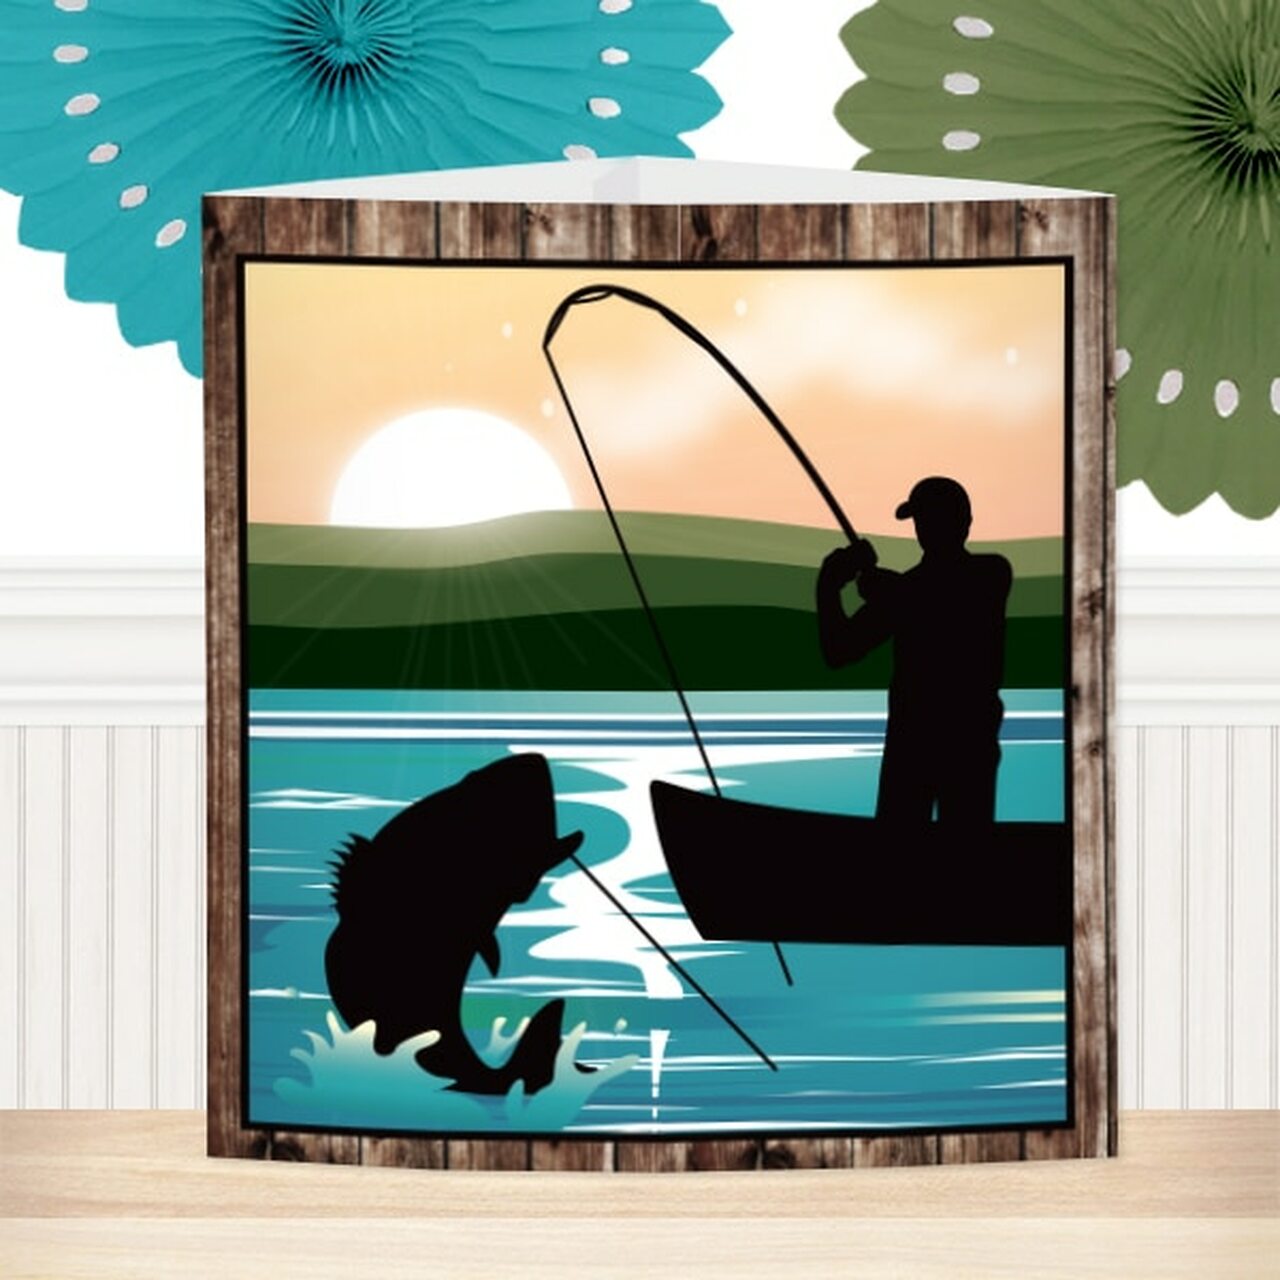 Birthday Direct's Bass Fishing Party Centerpiece